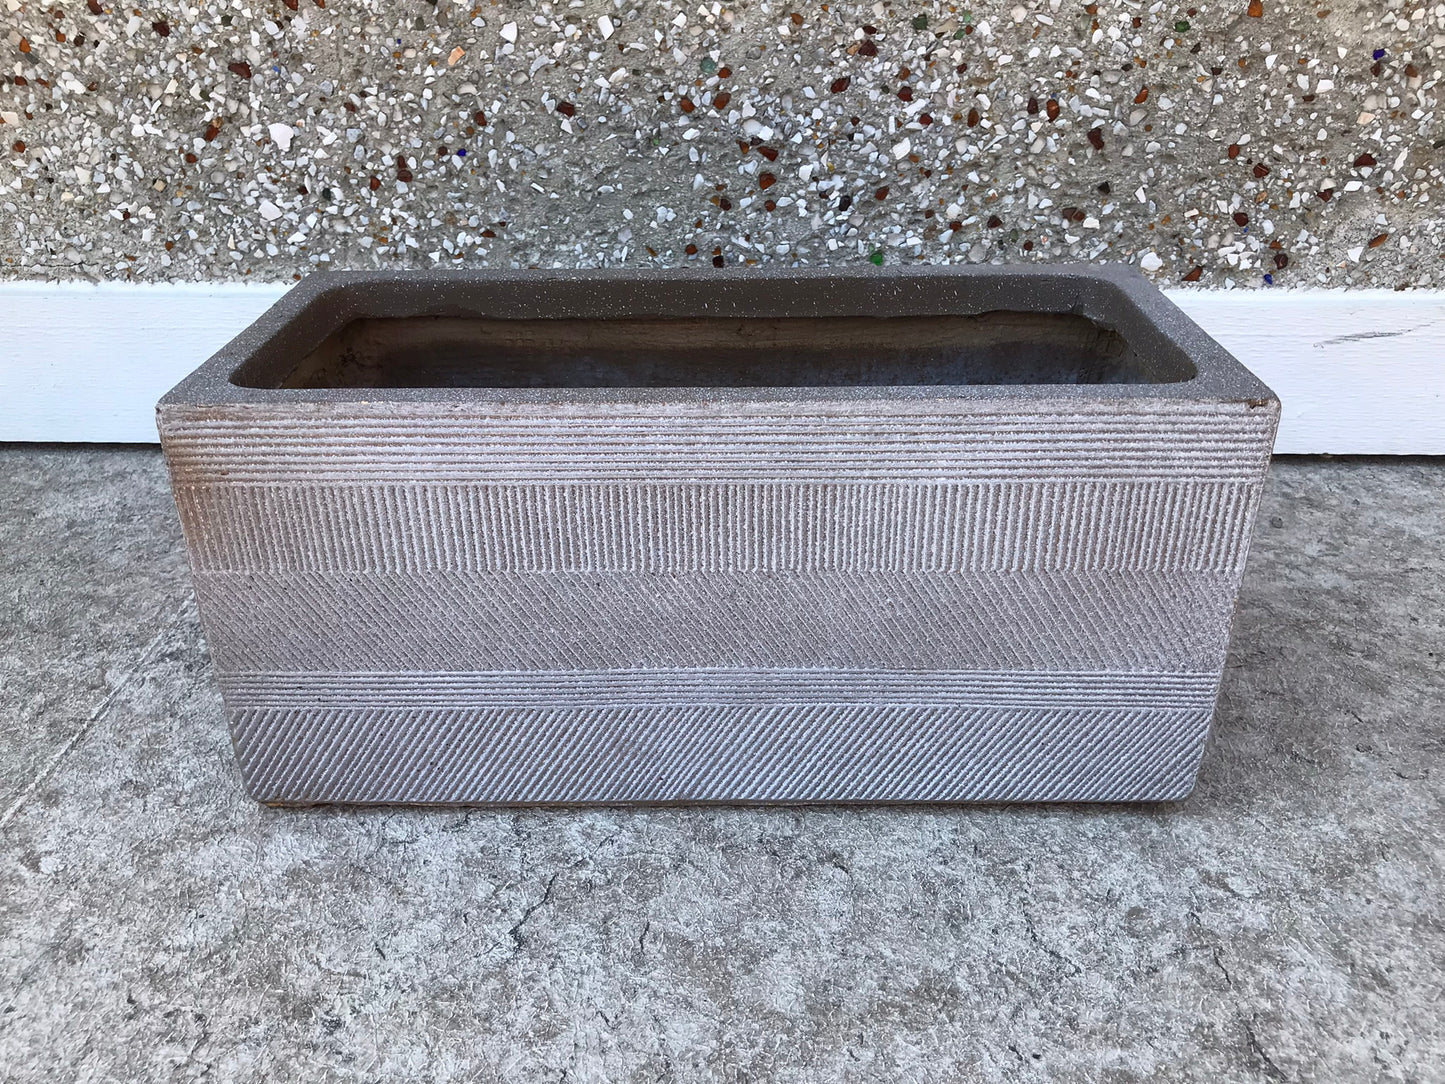 Garden Plant Box Flower Pot Thin Cement Style With Holes In Bottom 20x9x9 inch